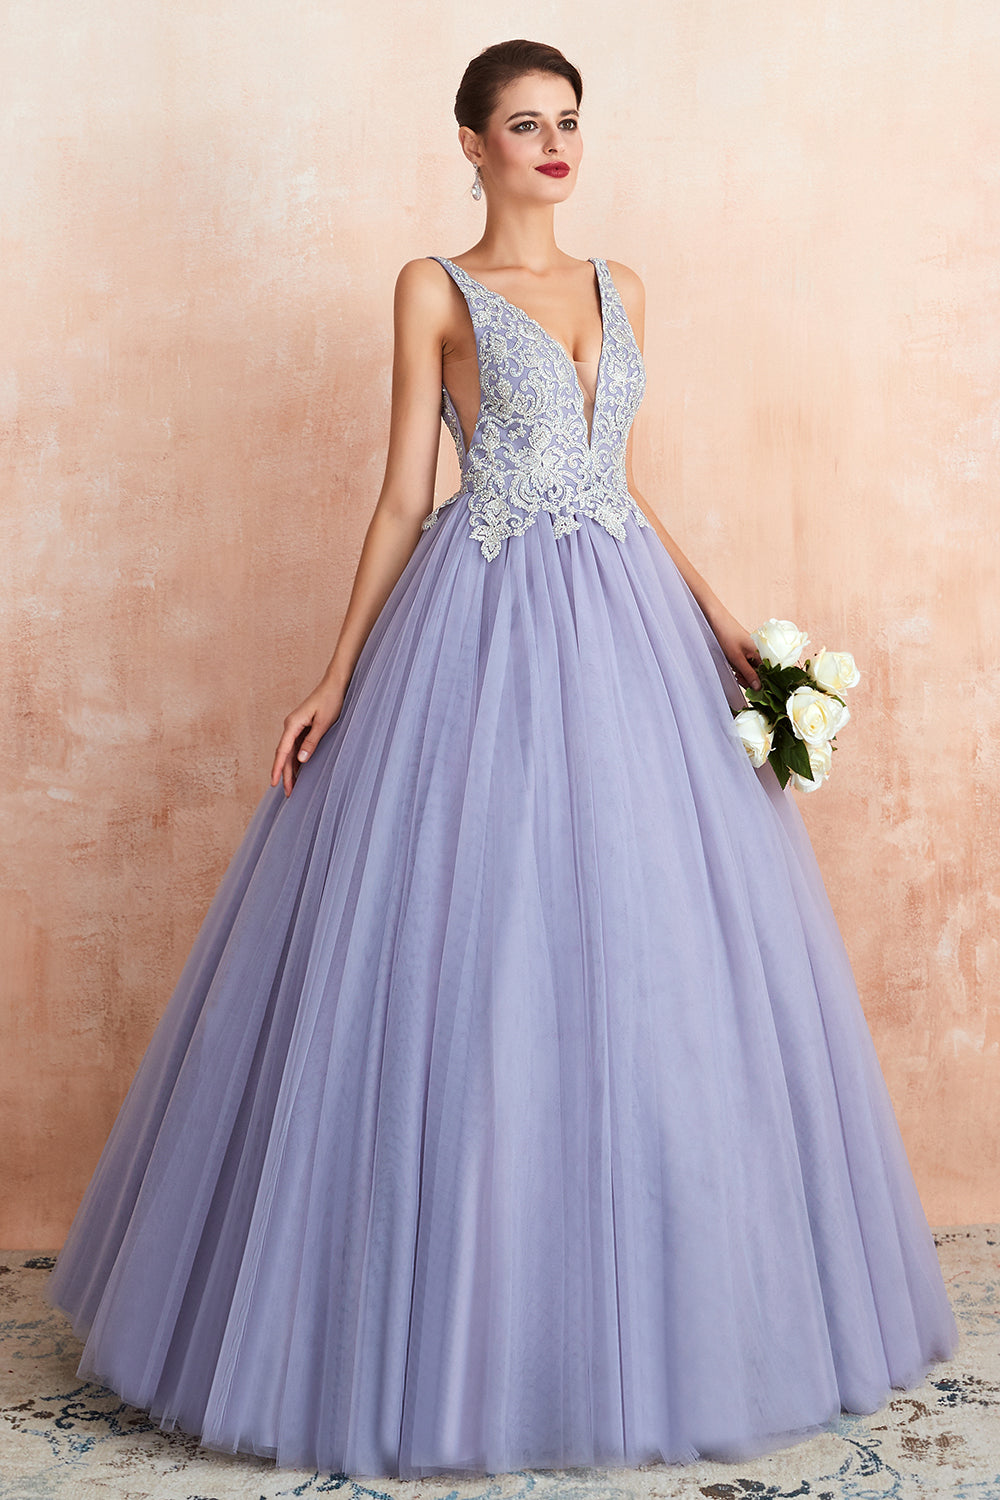 Load image into Gallery viewer, Excellent Long Princess V-neck Sleeveless Tulle Backless Prom Dress-BIZTUNNEL
